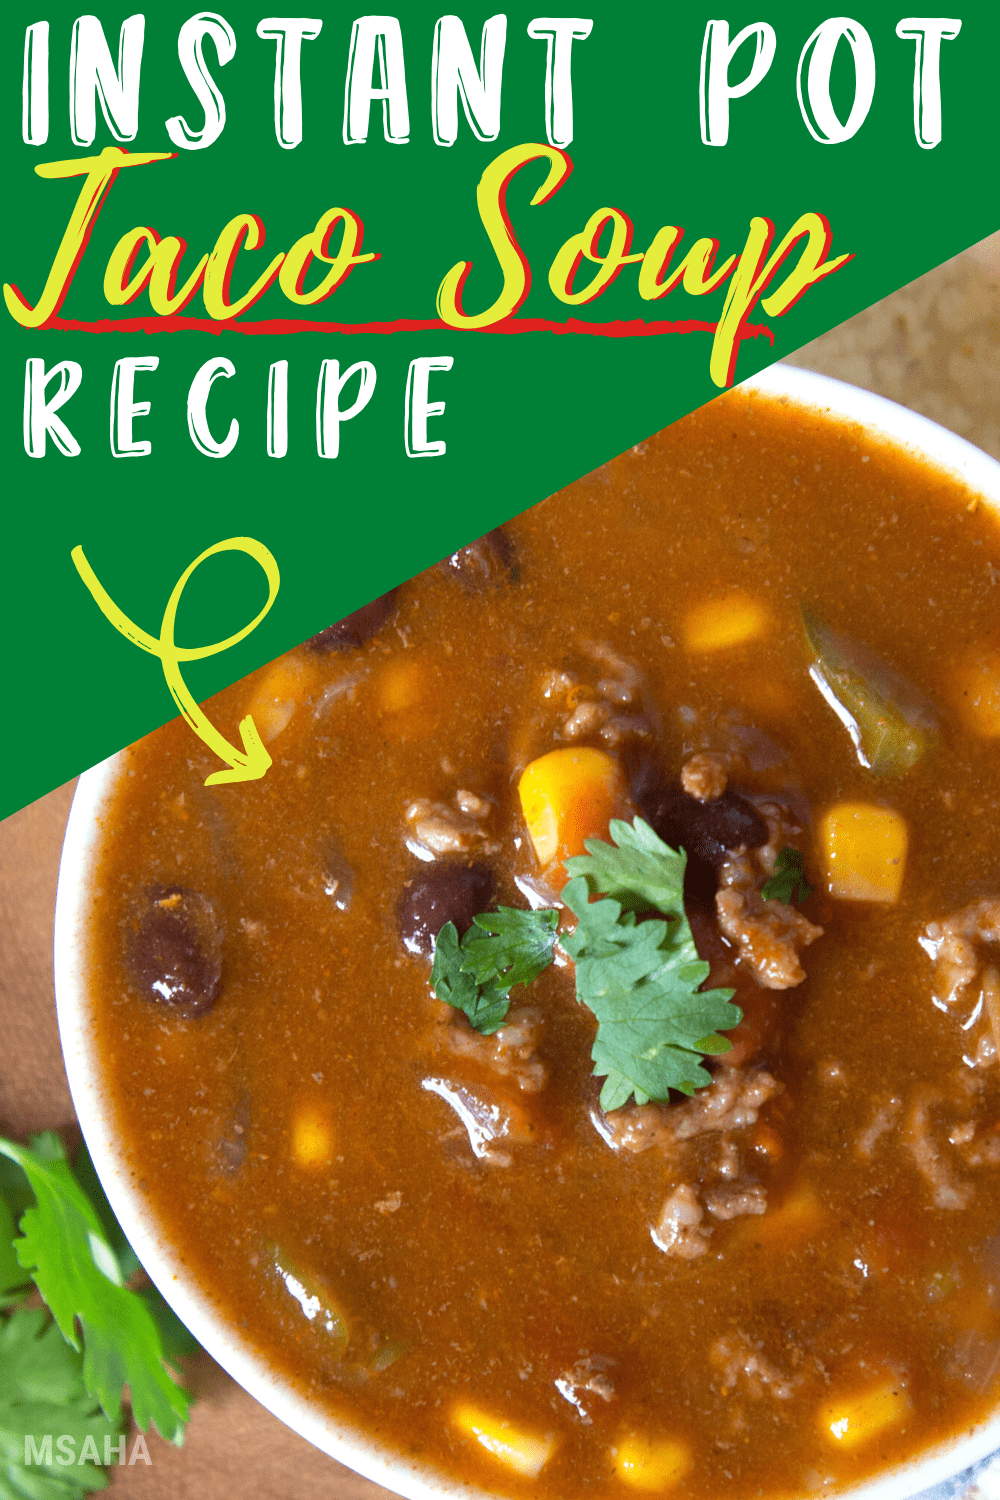 This is a very easy, yet tasteful taco soup made using an Instant Pot made with beans, beef, and many spices you are going to love. #instantpot #tacosoup #sopadetacos via @mystayathome